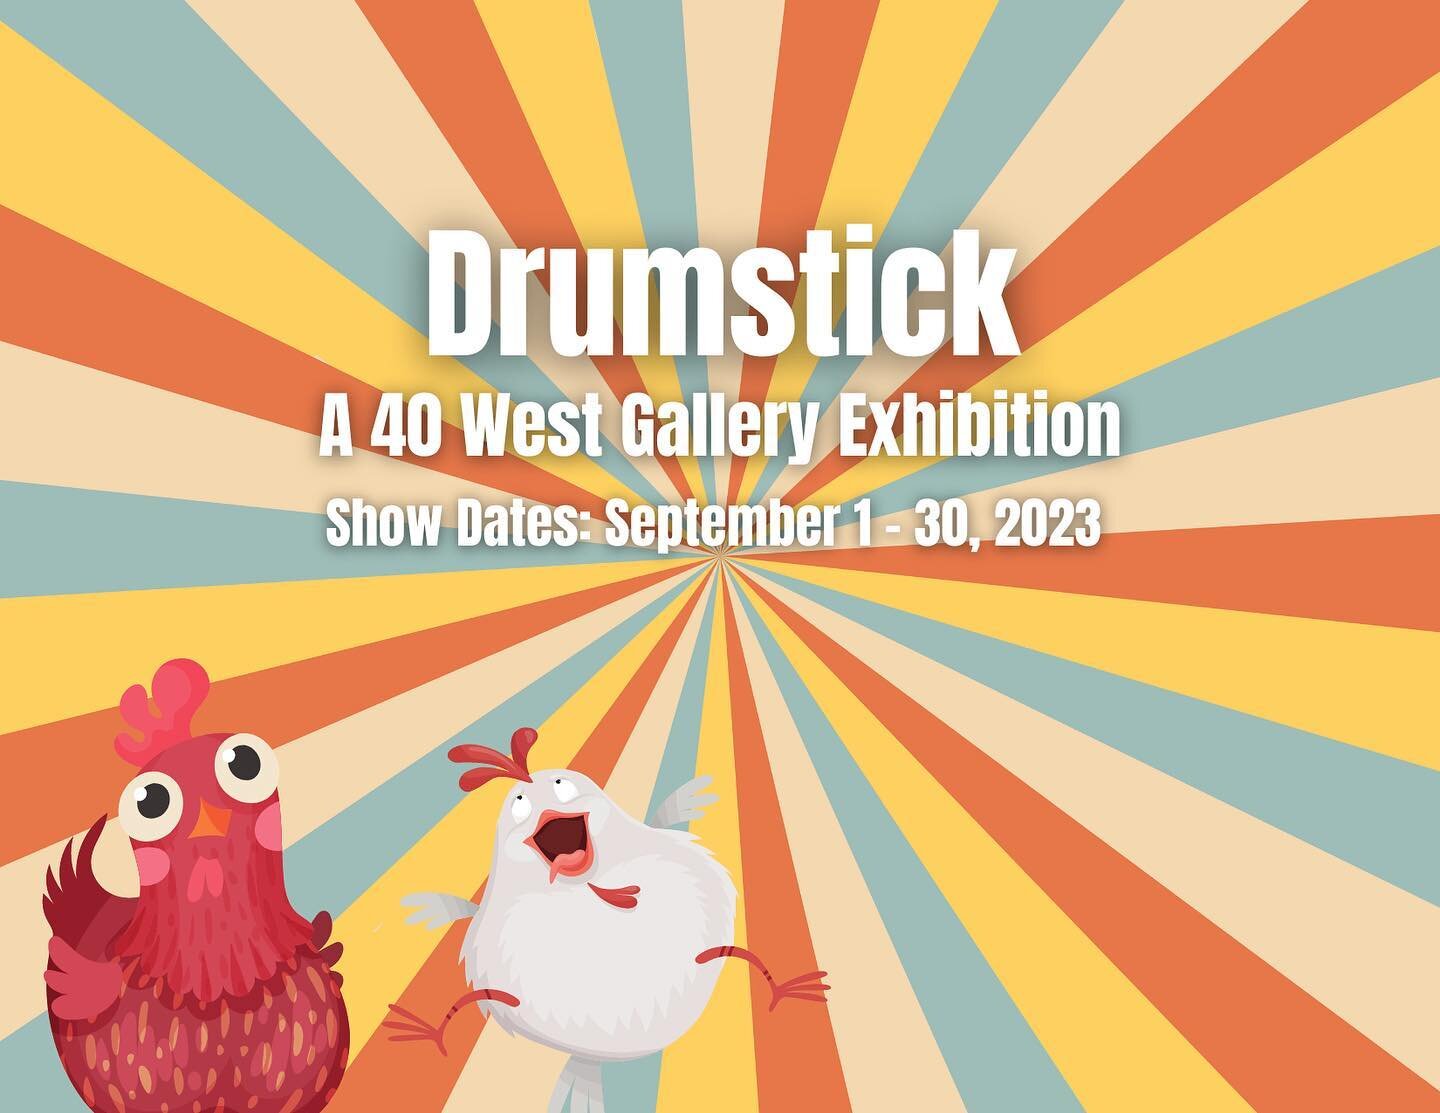 Cluck yea! 🐔 We're celebrating the history of the Drumstick building (now the HUB) with our upcoming exhibition, &ldquo;Drumstick&rdquo;! Open to all interpretations of the building&rsquo;s history and of course chickens &ndash; artists of all exper